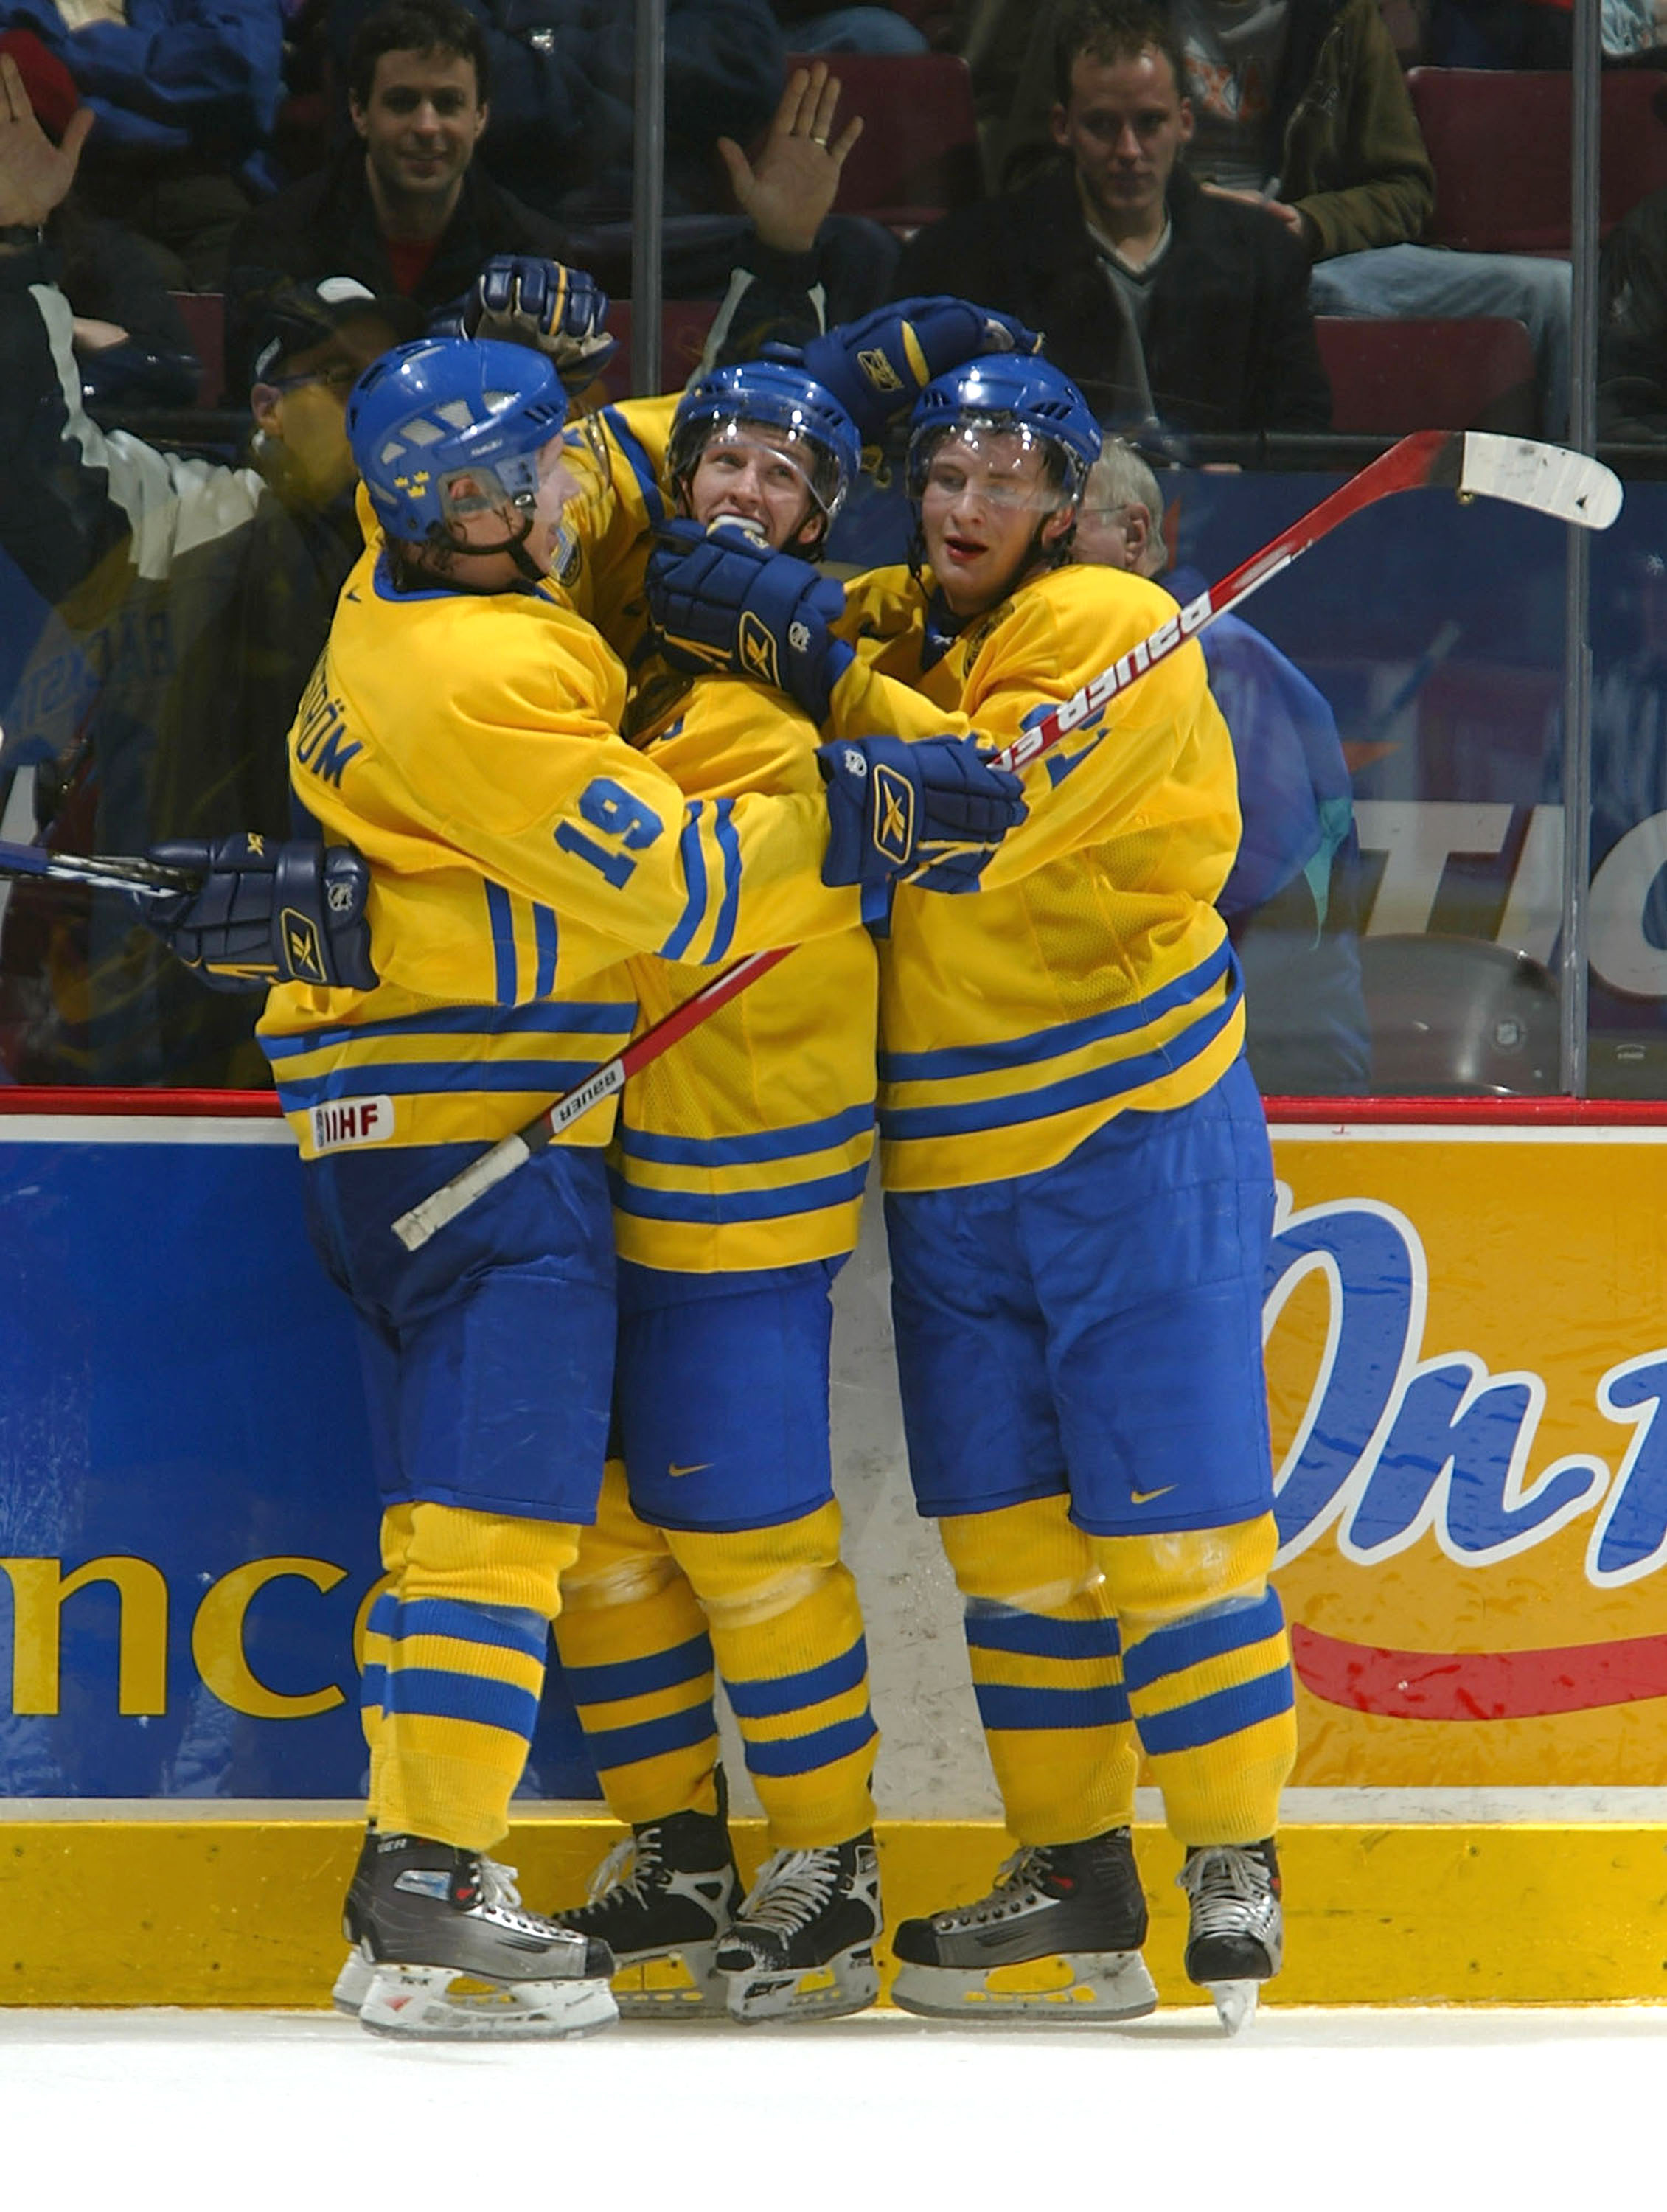 VANCOUVER - JANUARY 4:  Nicklas Bergfors #19, Mattias Ritola #21, both of Team Sweden, congratulate teammate Sebastian Karlsson #3 after he scored an empty net goal during their World Jr. Hockey Championship 5th place game on January 4, 2006 at General Mo